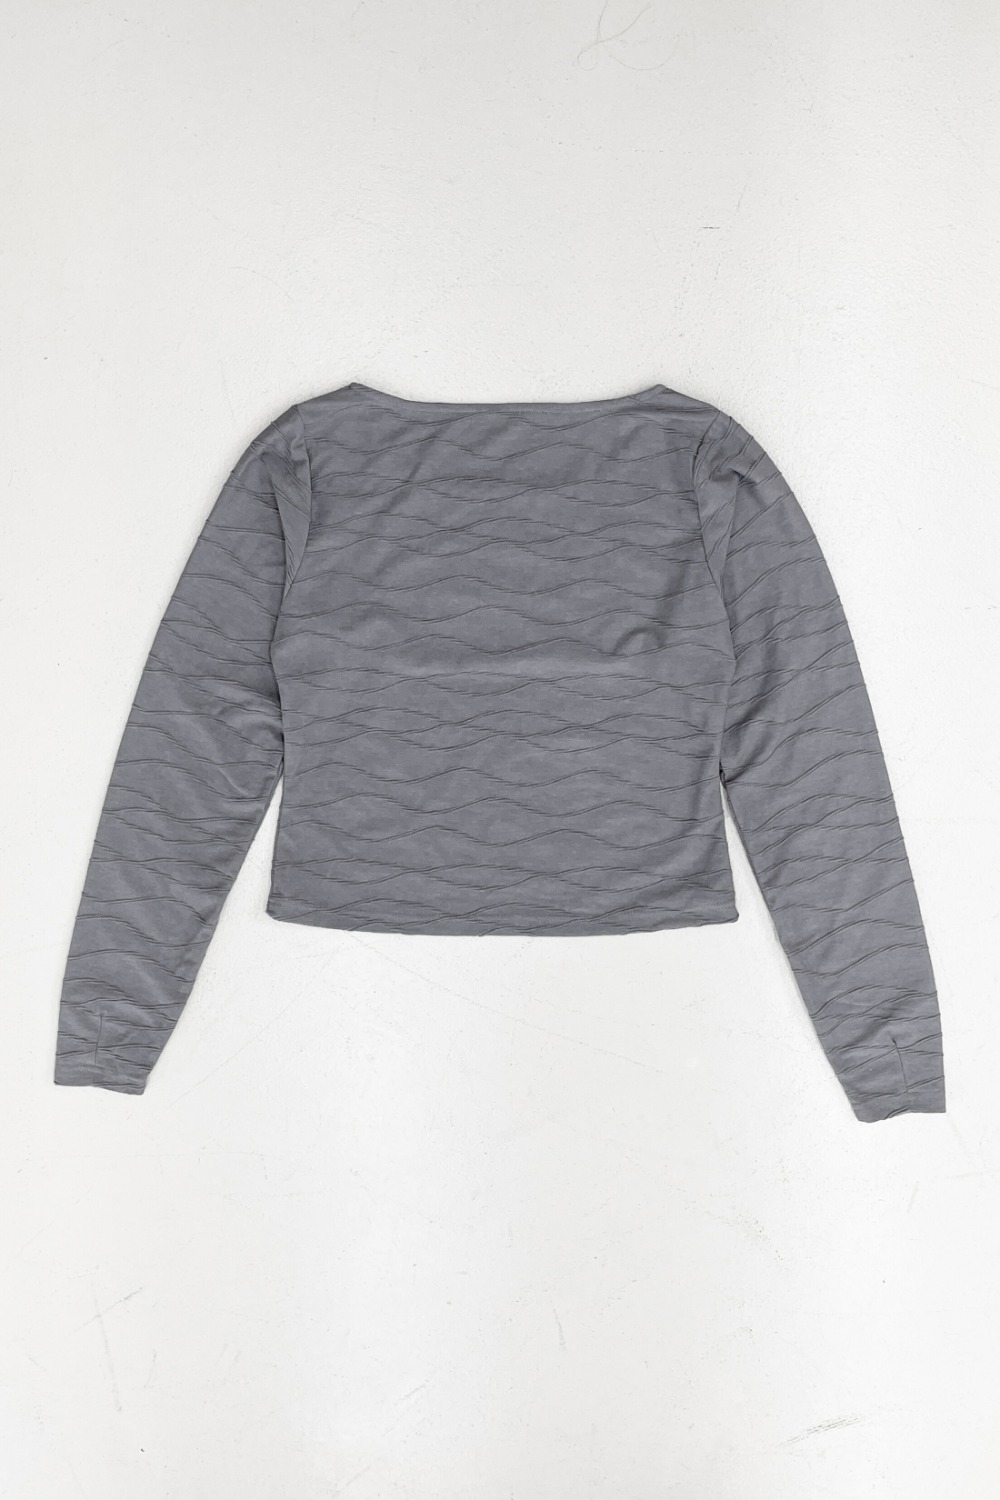 WAVE LONG SLEEVE TOP (4color)